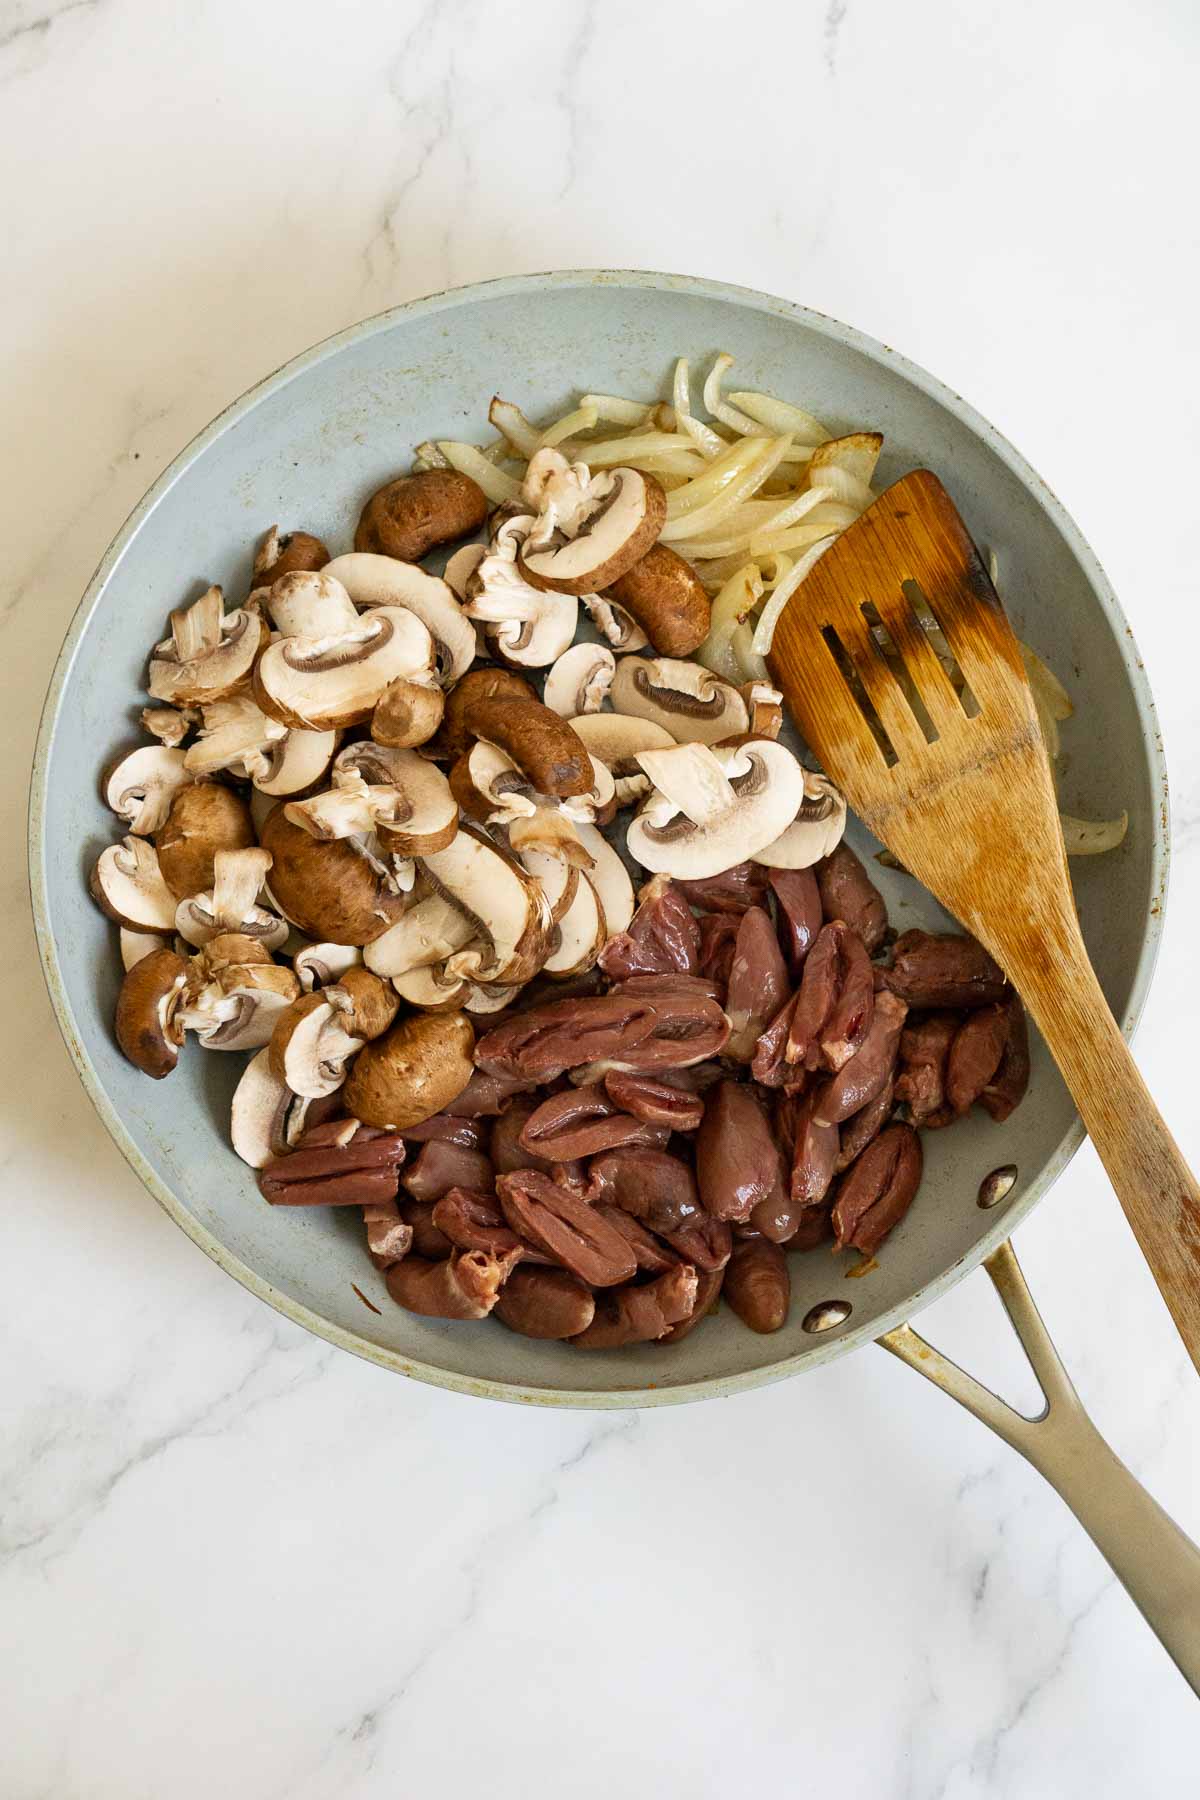 Skillet of sauteed onions, sliced mushrooms, and chicken hearts.